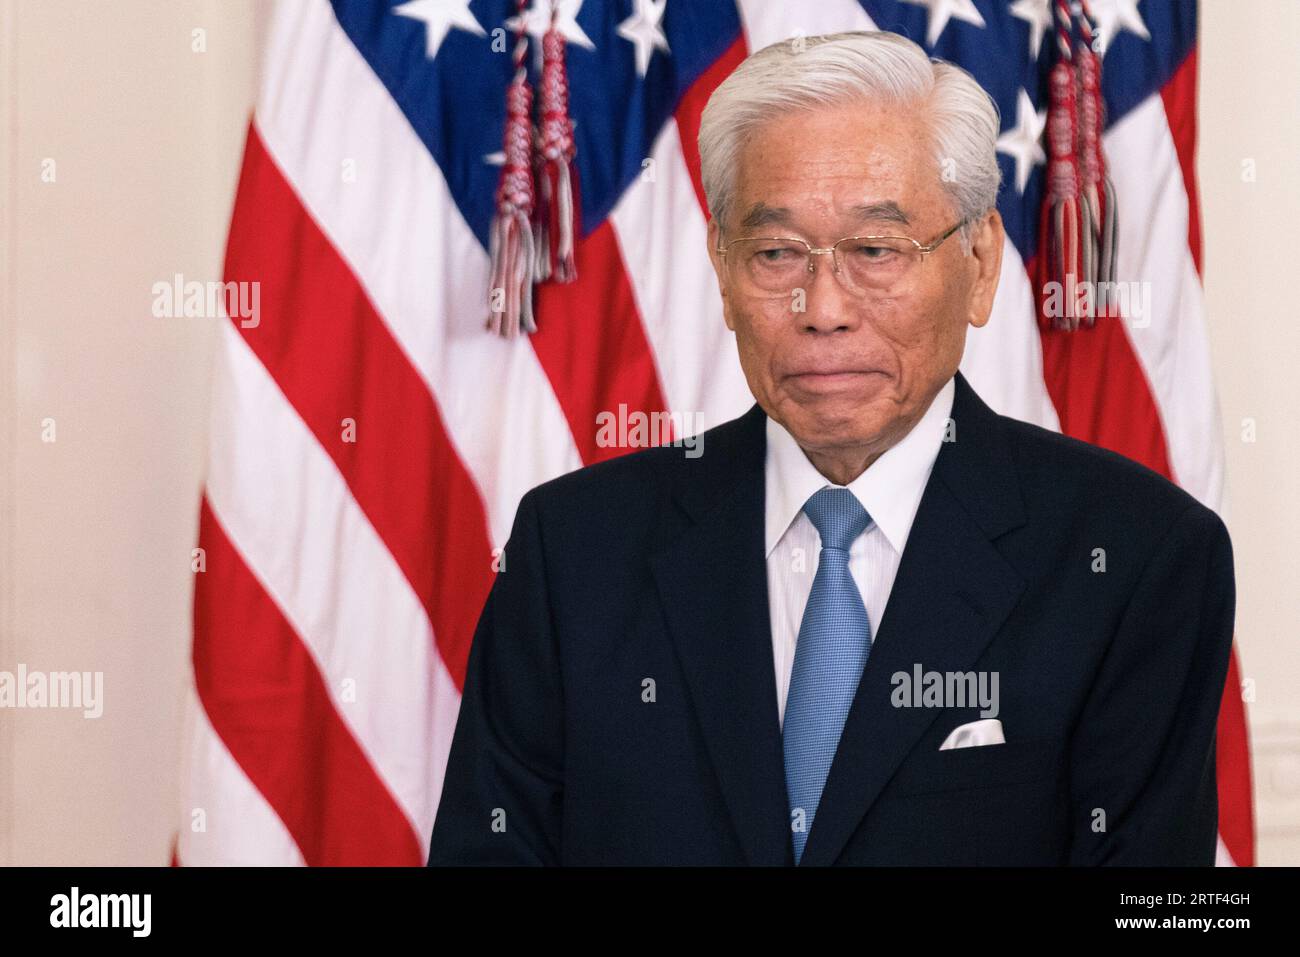 The Arts. 12th Sep, 2023. Hisashi Hieda, Chairman of the Japan Art Association gives remarks in the East Room of the White House during the 2023 Praemium Imperiale Laureate ceremony in Washington, DC on Tuesday, September 12, 2023. The Praemium Imperiale is a global arts prize awarded annually by the Japan Art Association for lifetime achievement in the arts. Credit: Aaron Schwartz/CNP/dpa/Alamy Live News Stock Photo